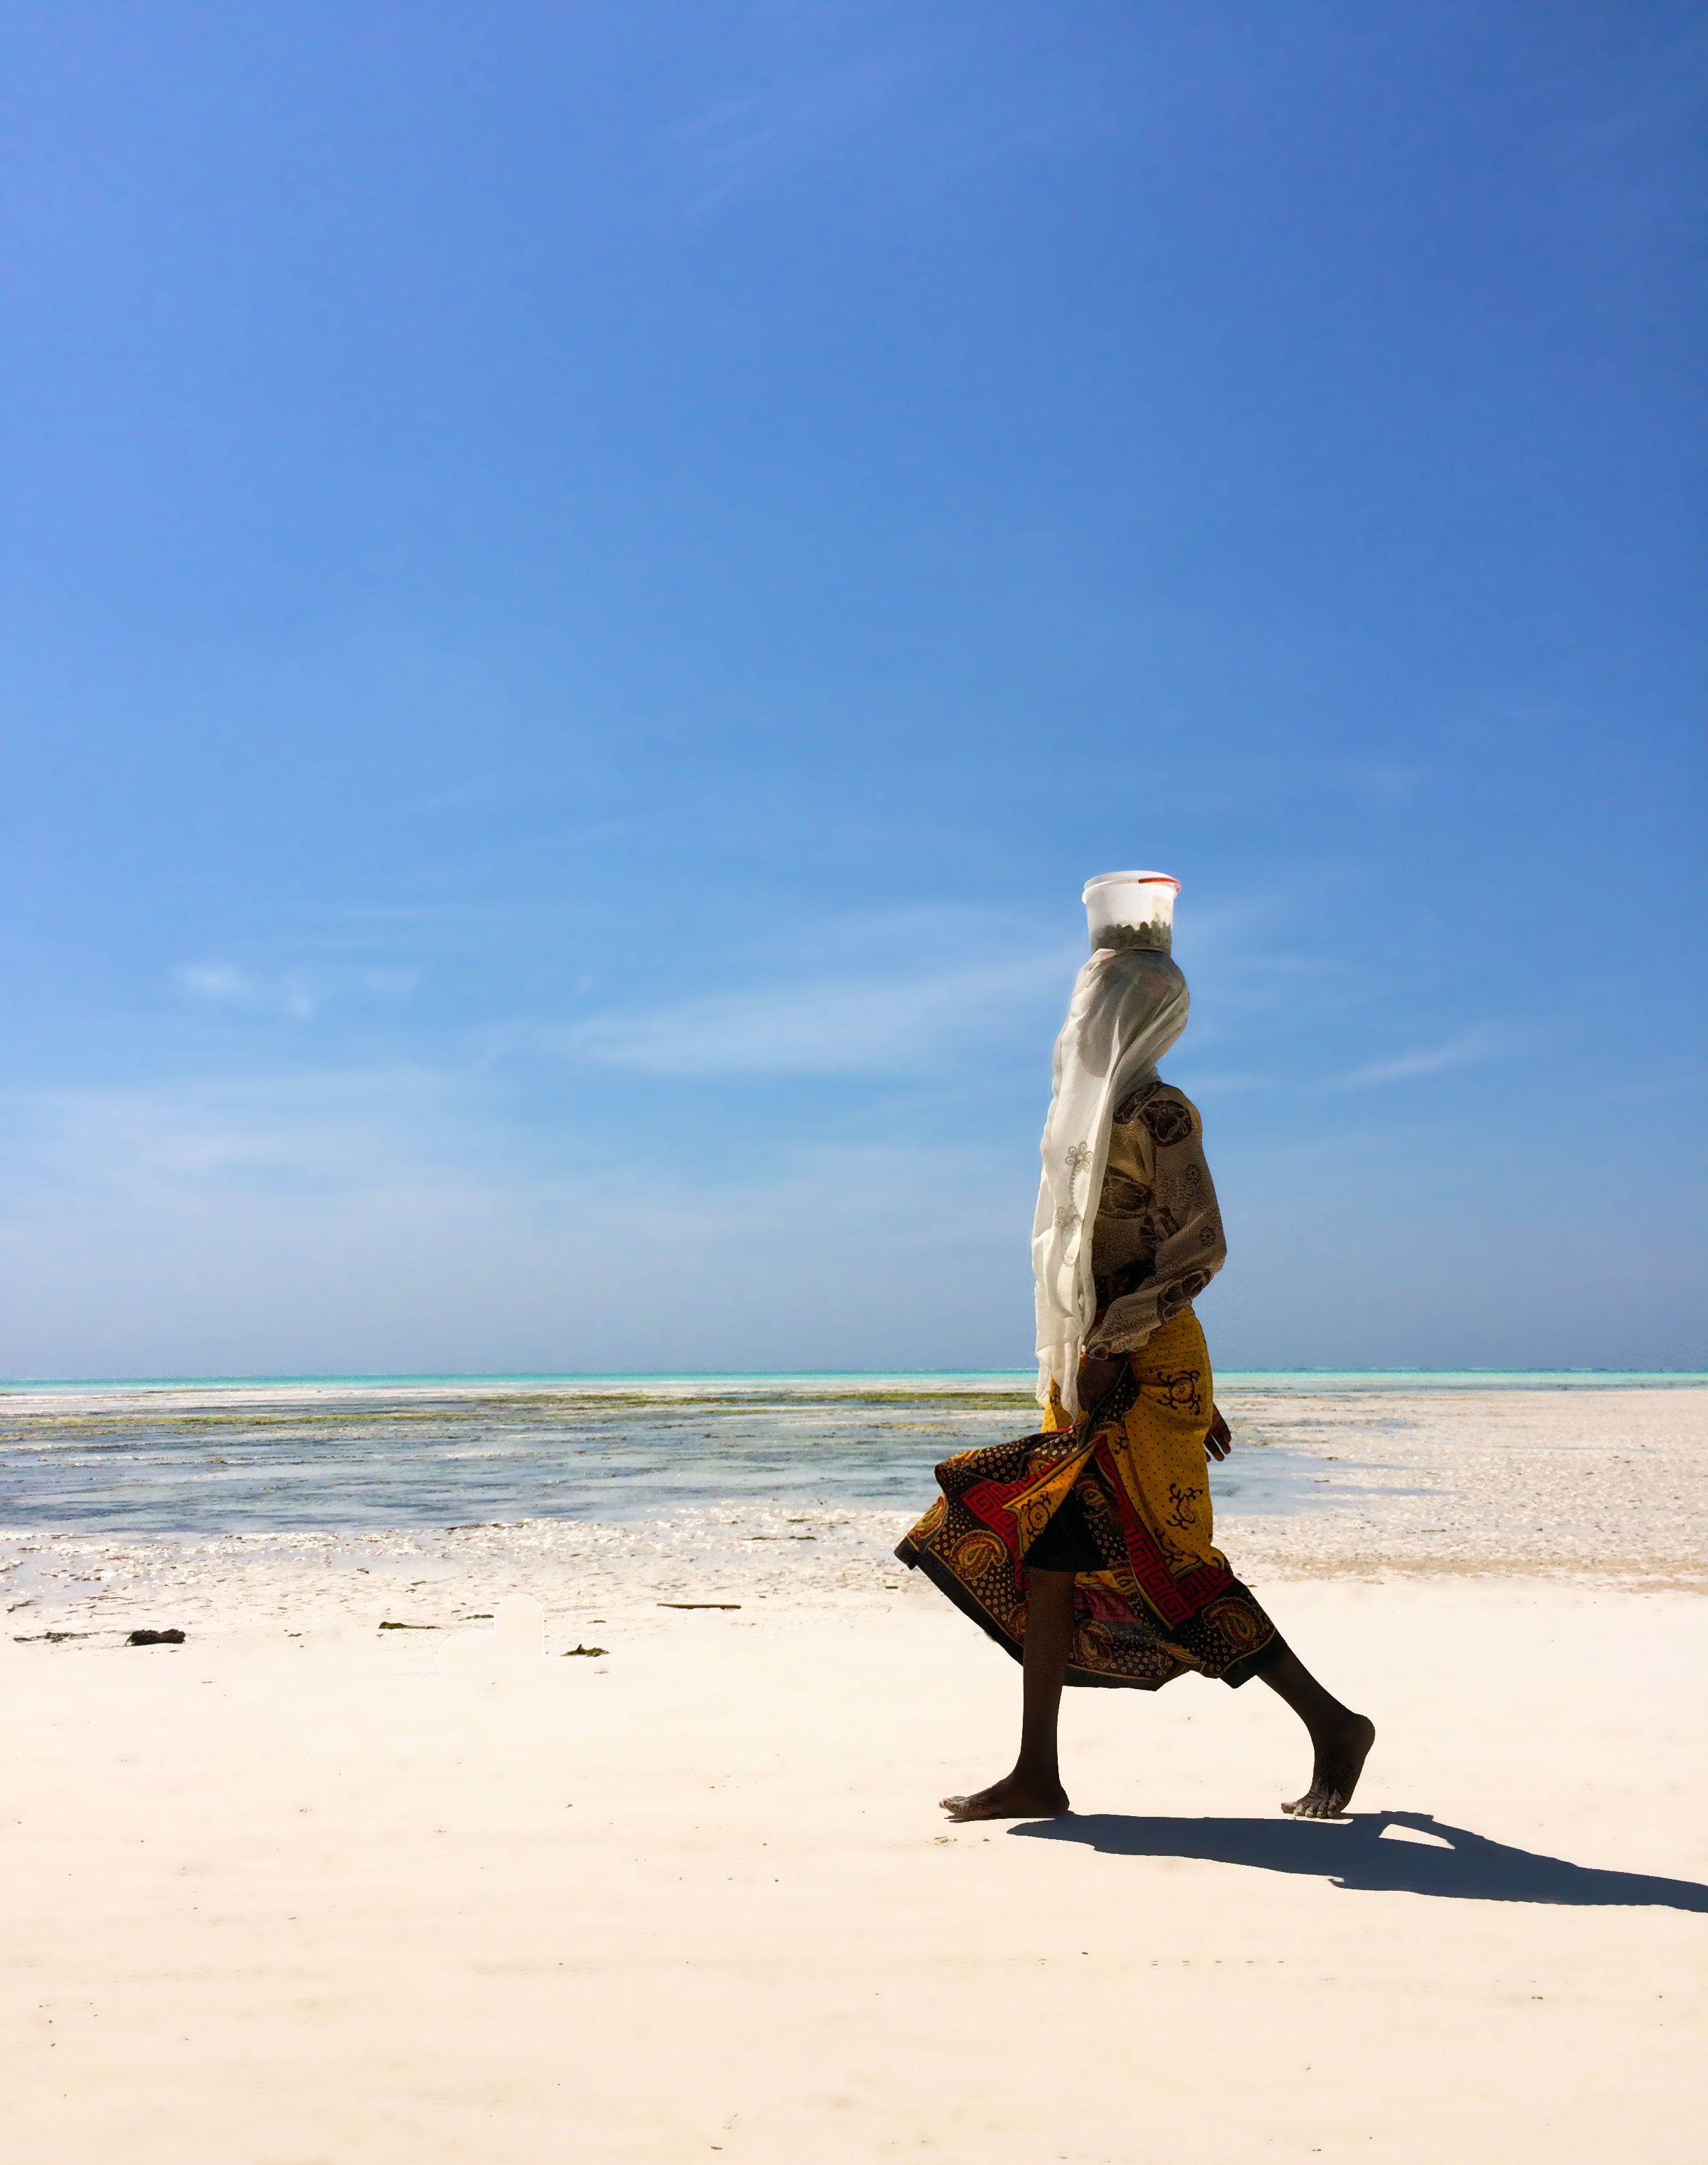  Woman carries her daily catch of mollusks on her head&nbsp;  Jambiani, Zanzibar 